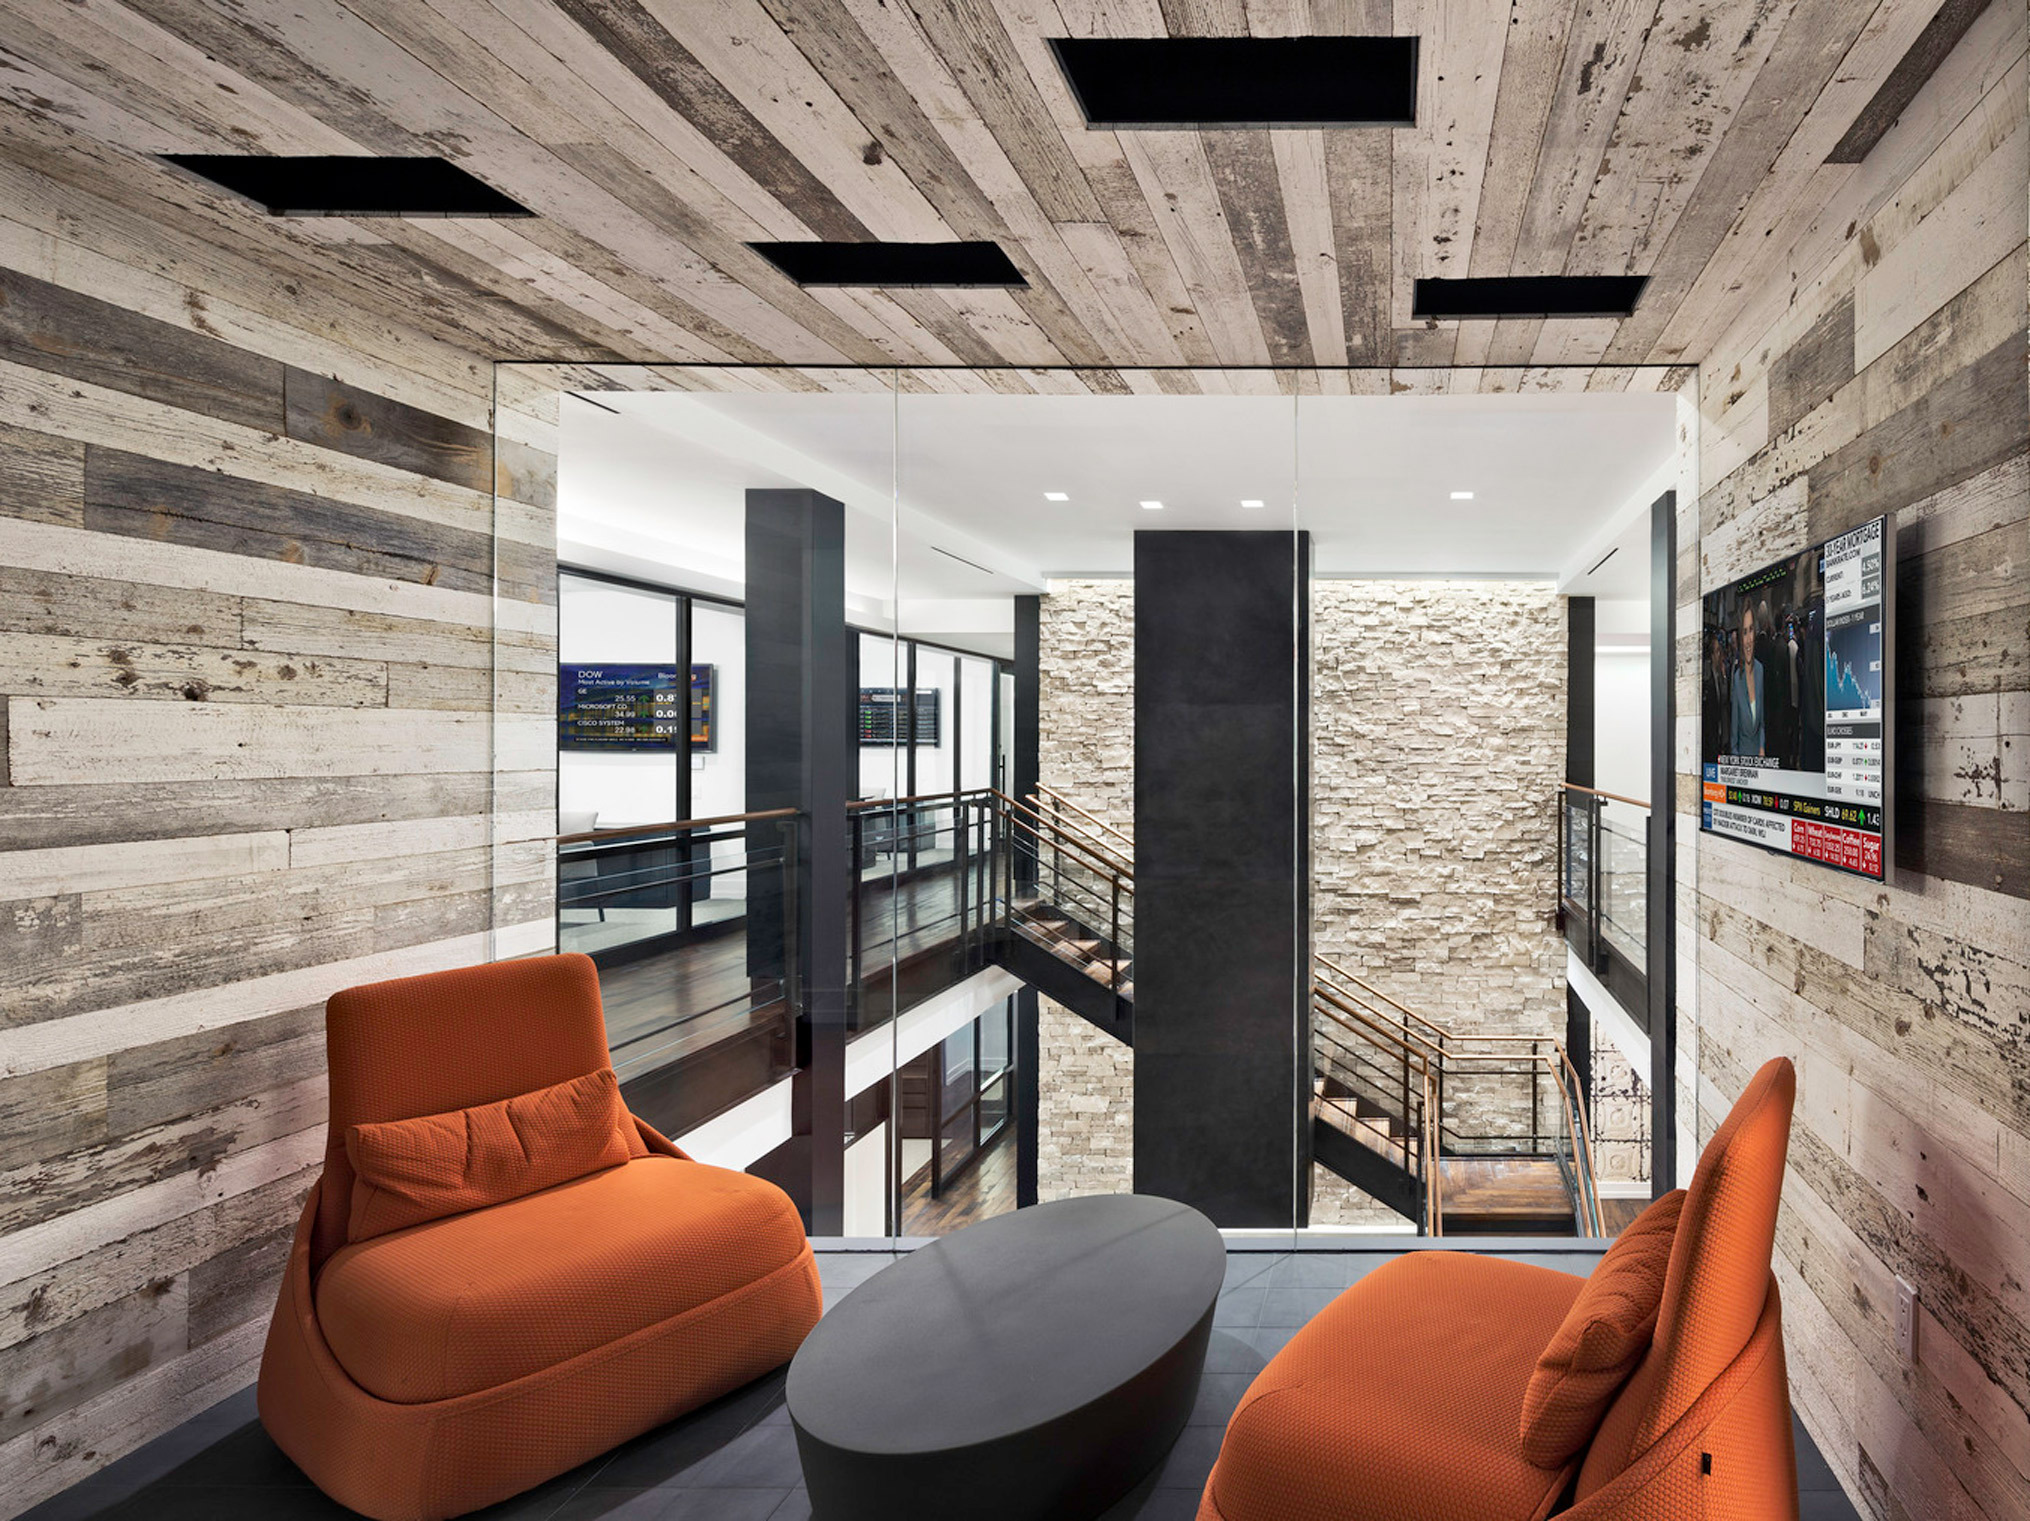 Modern open-plan interior featuring reclaimed wood-clad walls and ceilings juxtaposed with sleek black beams and railings. Burnt orange armchairs and a slate gray ottoman create a warm, inviting focal point before expansive glass panes overlooking a staircase and stone column.